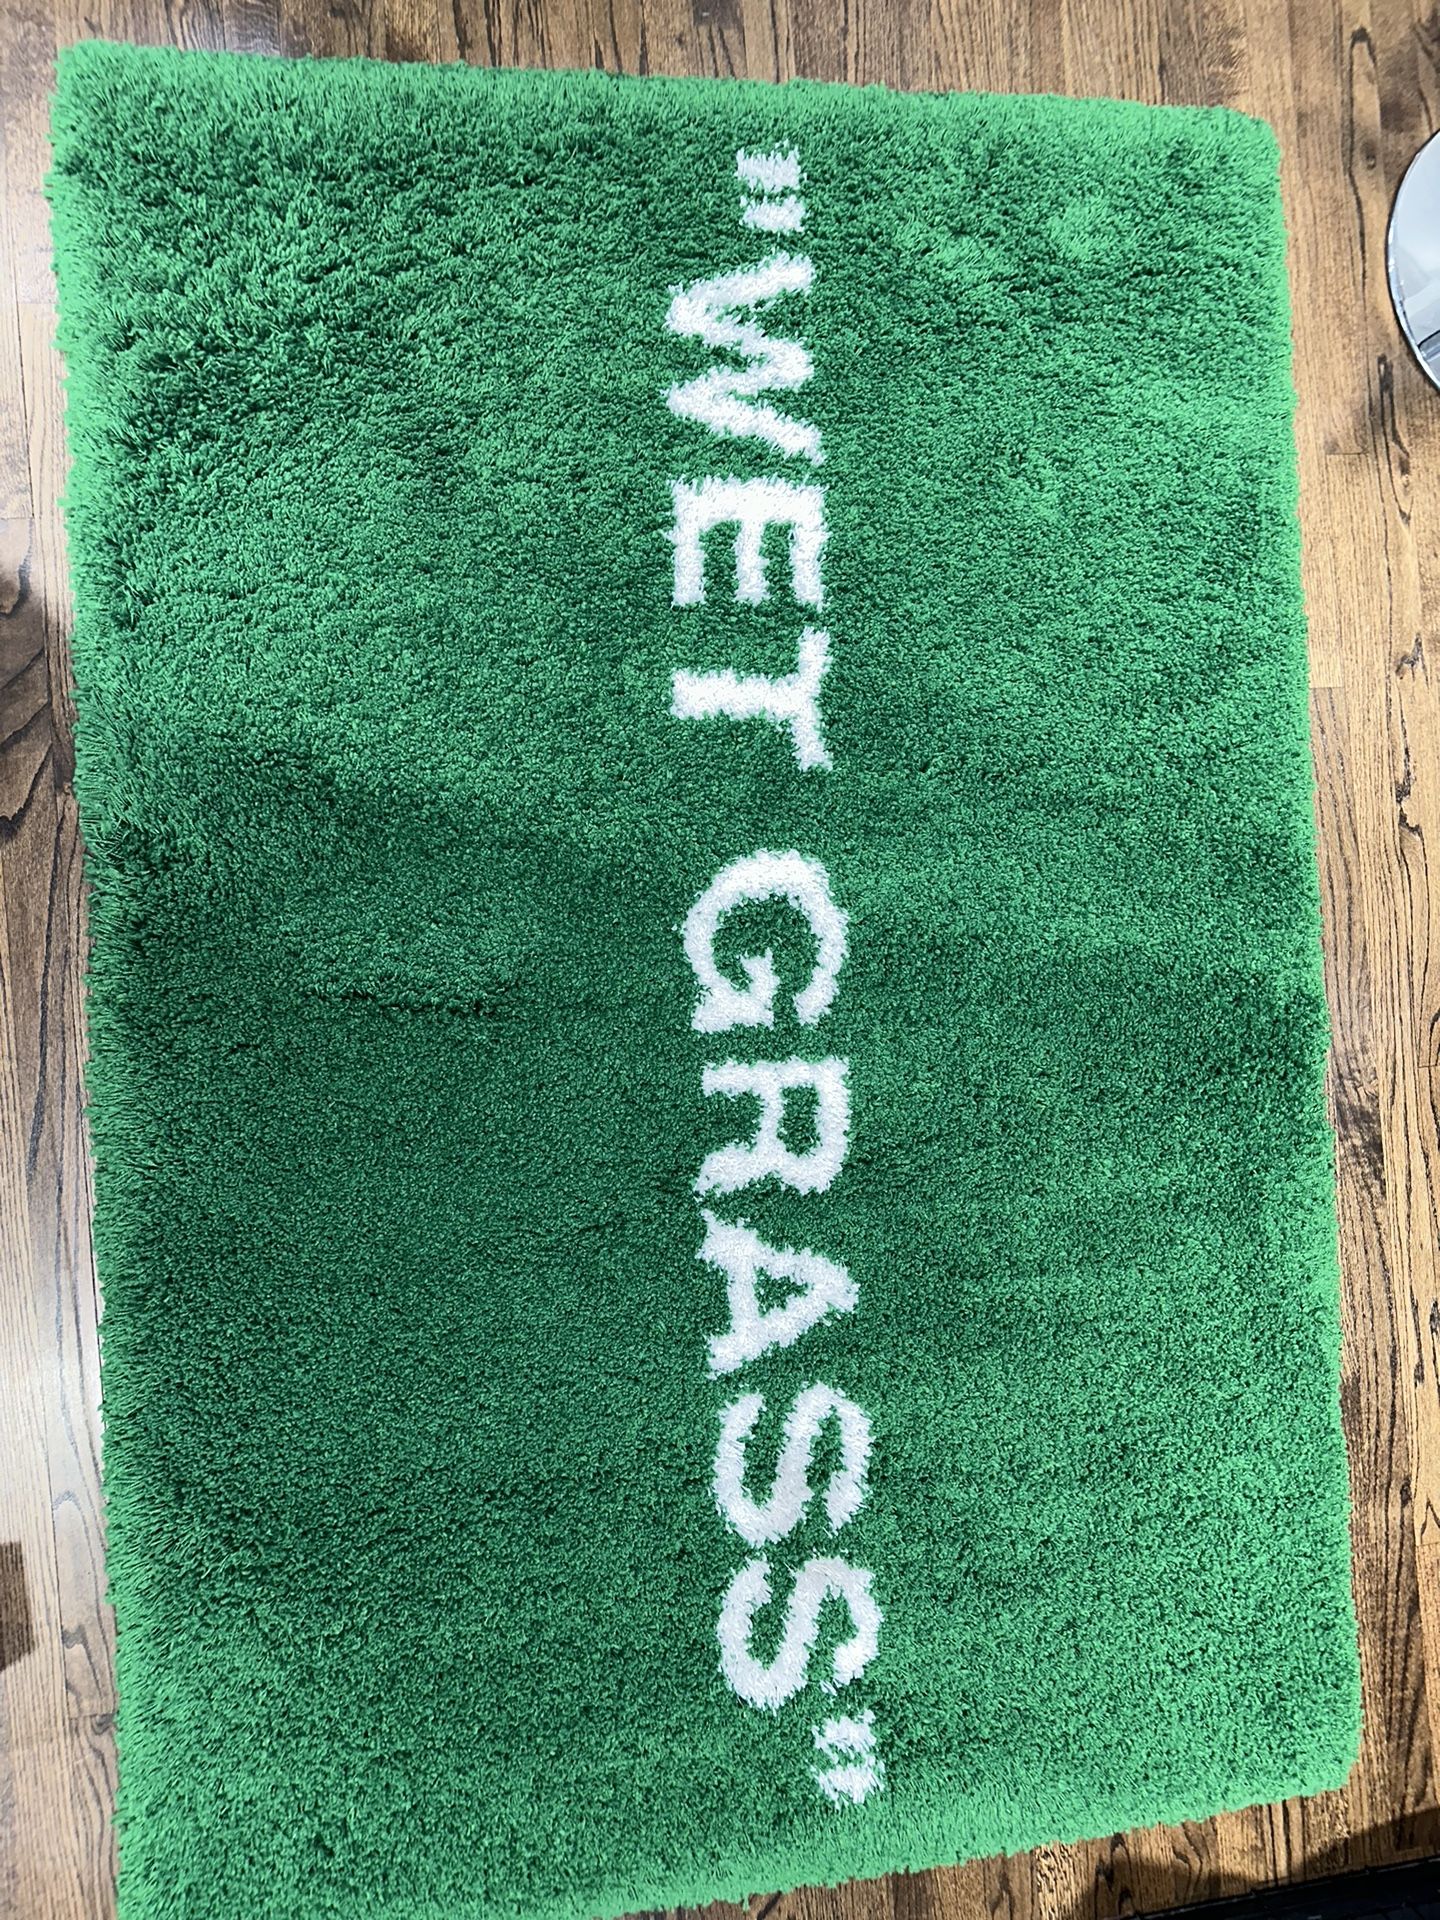 Off white x Ikea “wet grass” rug $800 for used $1000 for new